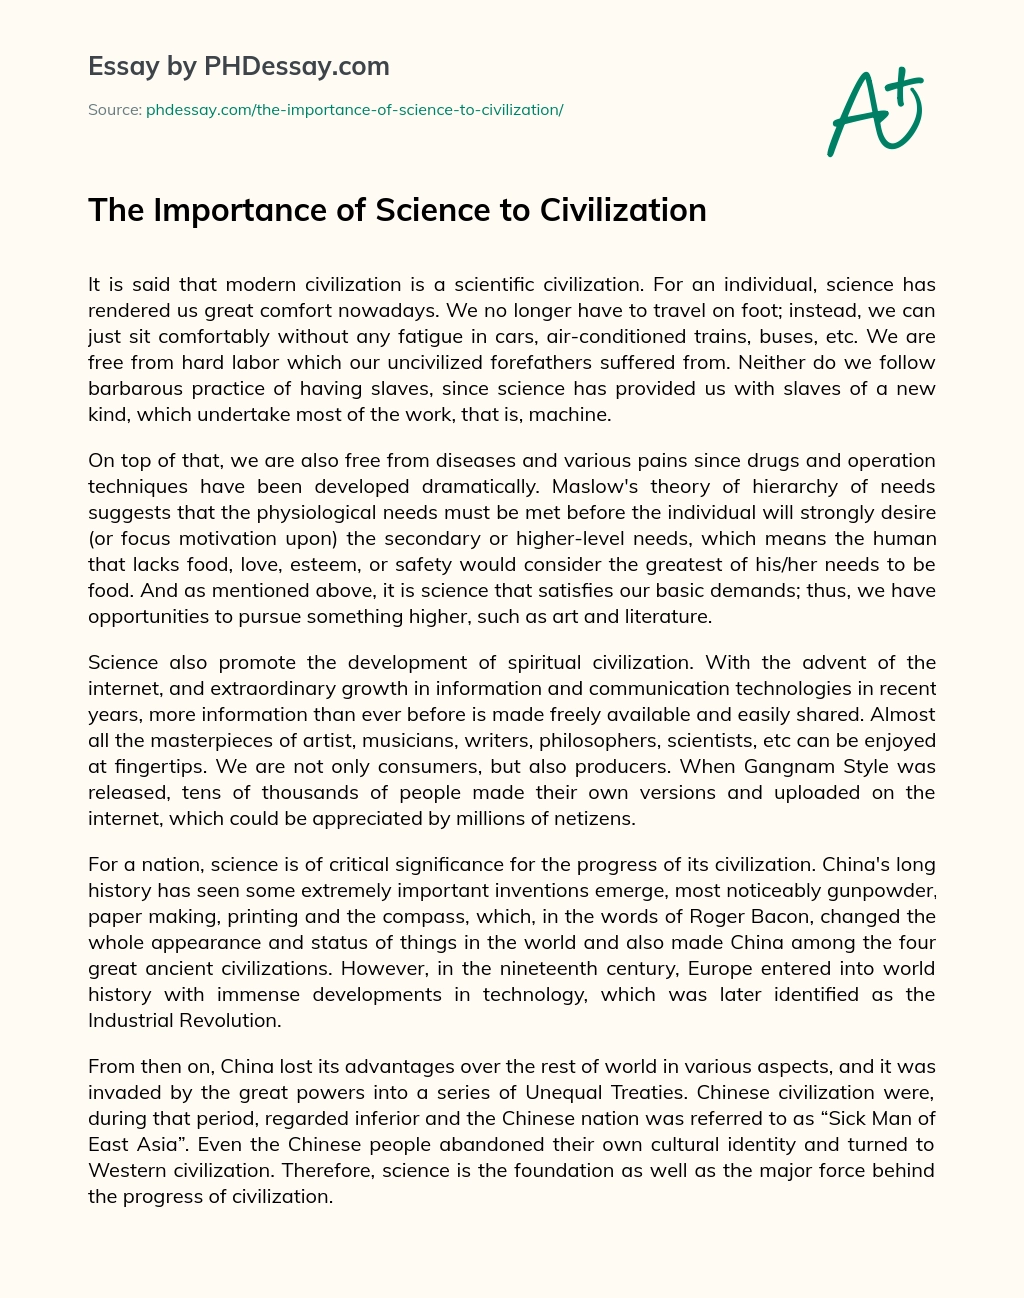 The Importance of Science to Civilization essay